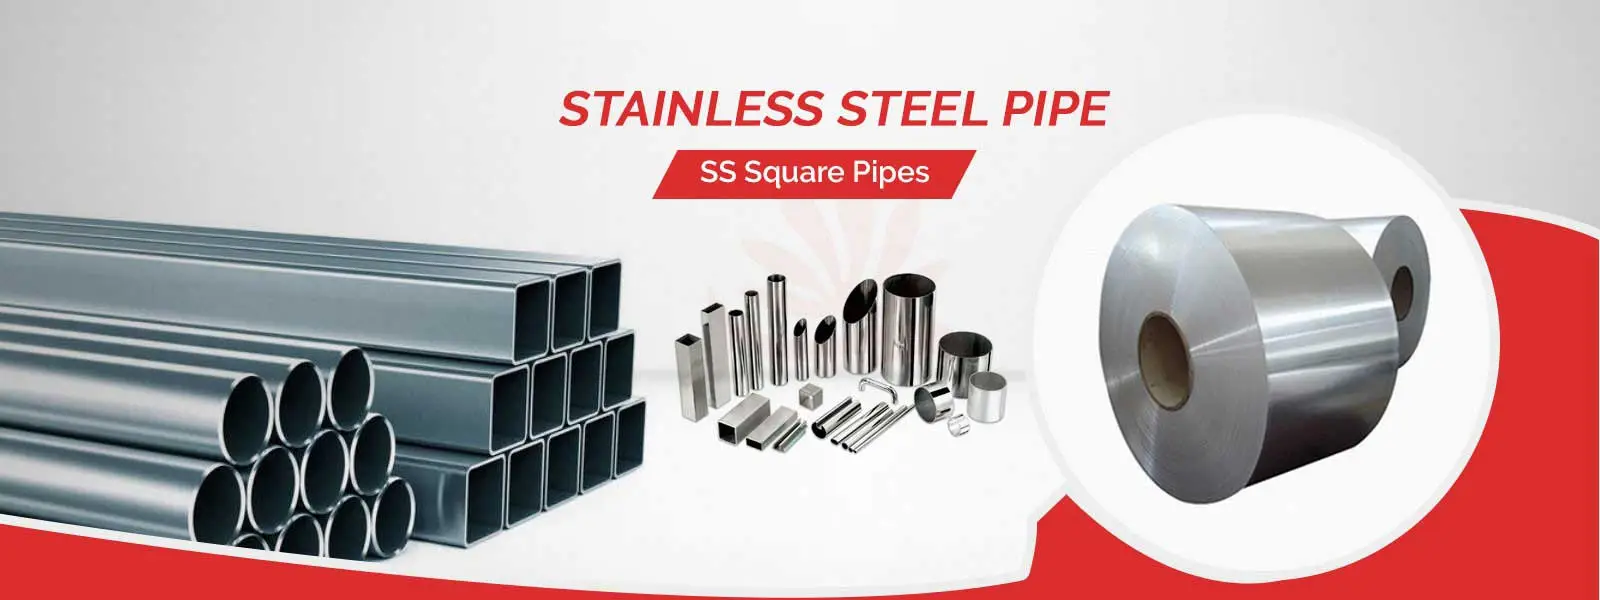 Stainless Steel Pipe Manufacturers in Chhattisgarh